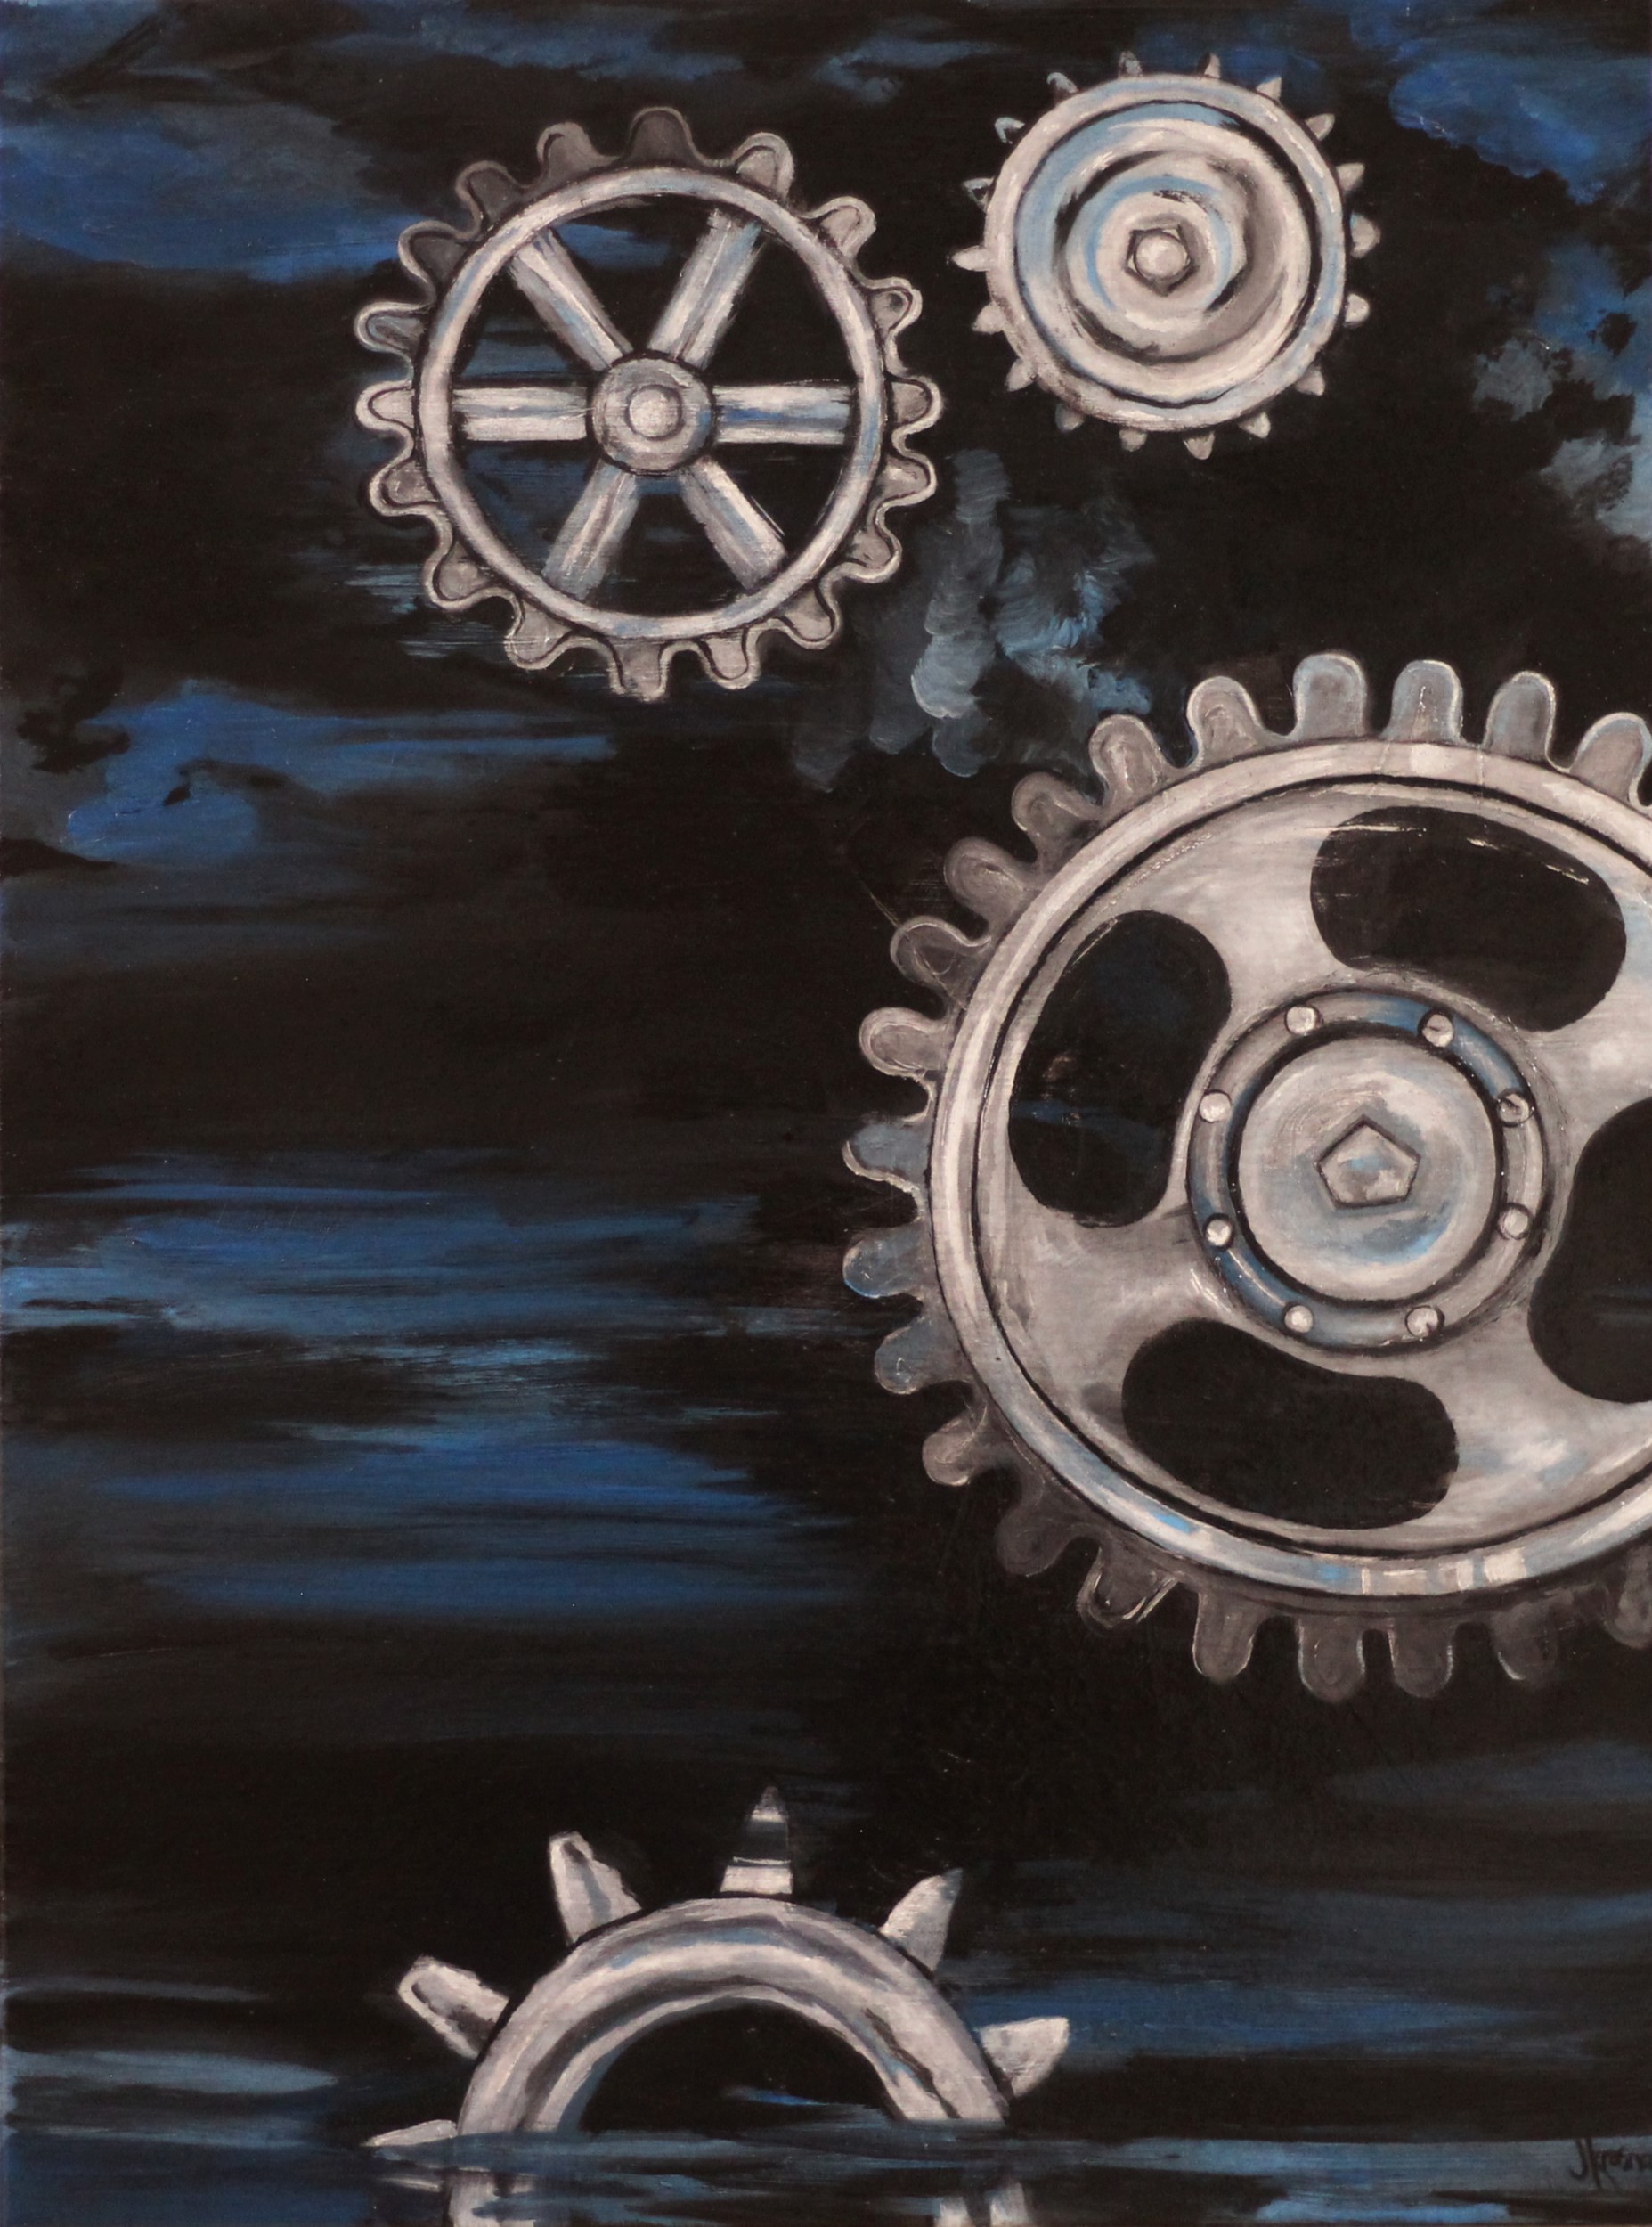 Gears 2 2021 Oil on canvas 24 x 18 Resized